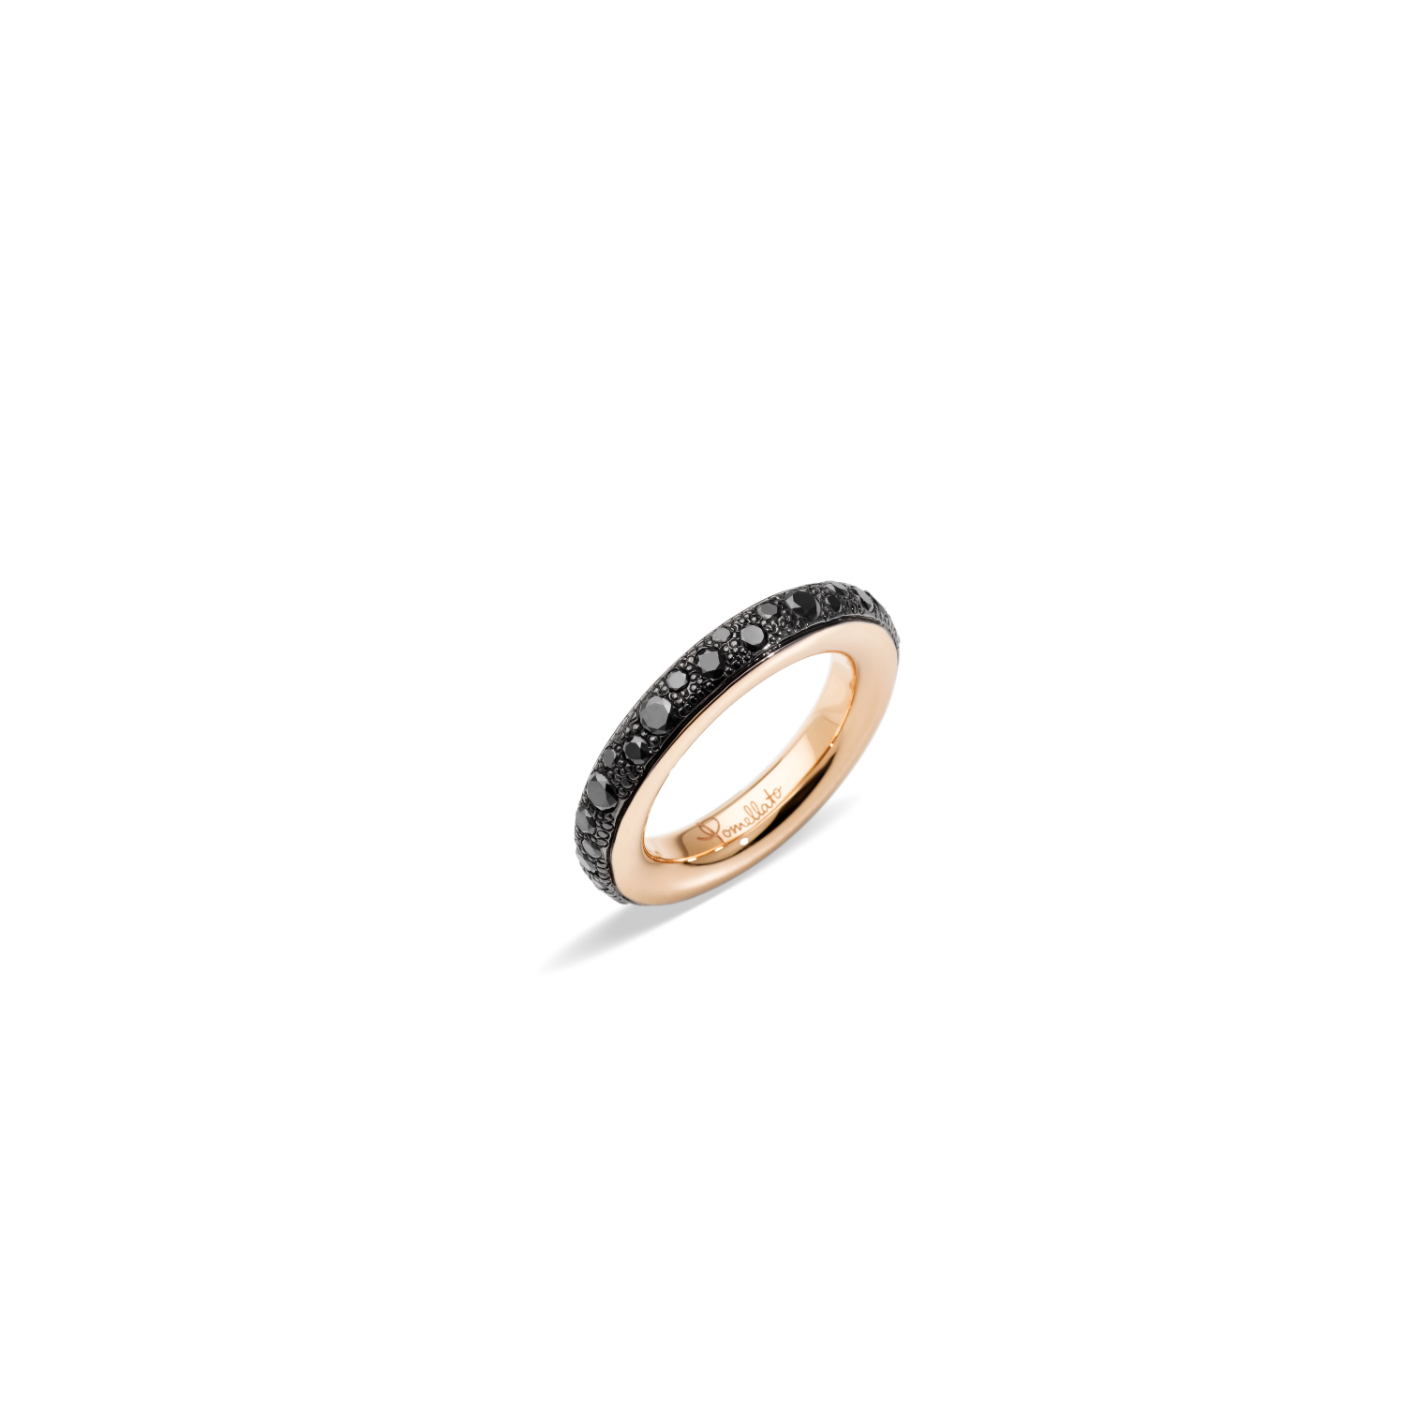 PAB7120_O7000_DBK00_010_Pomellato_ring-iconica-small-rose-gold-18kt-treated-black-diamond.png